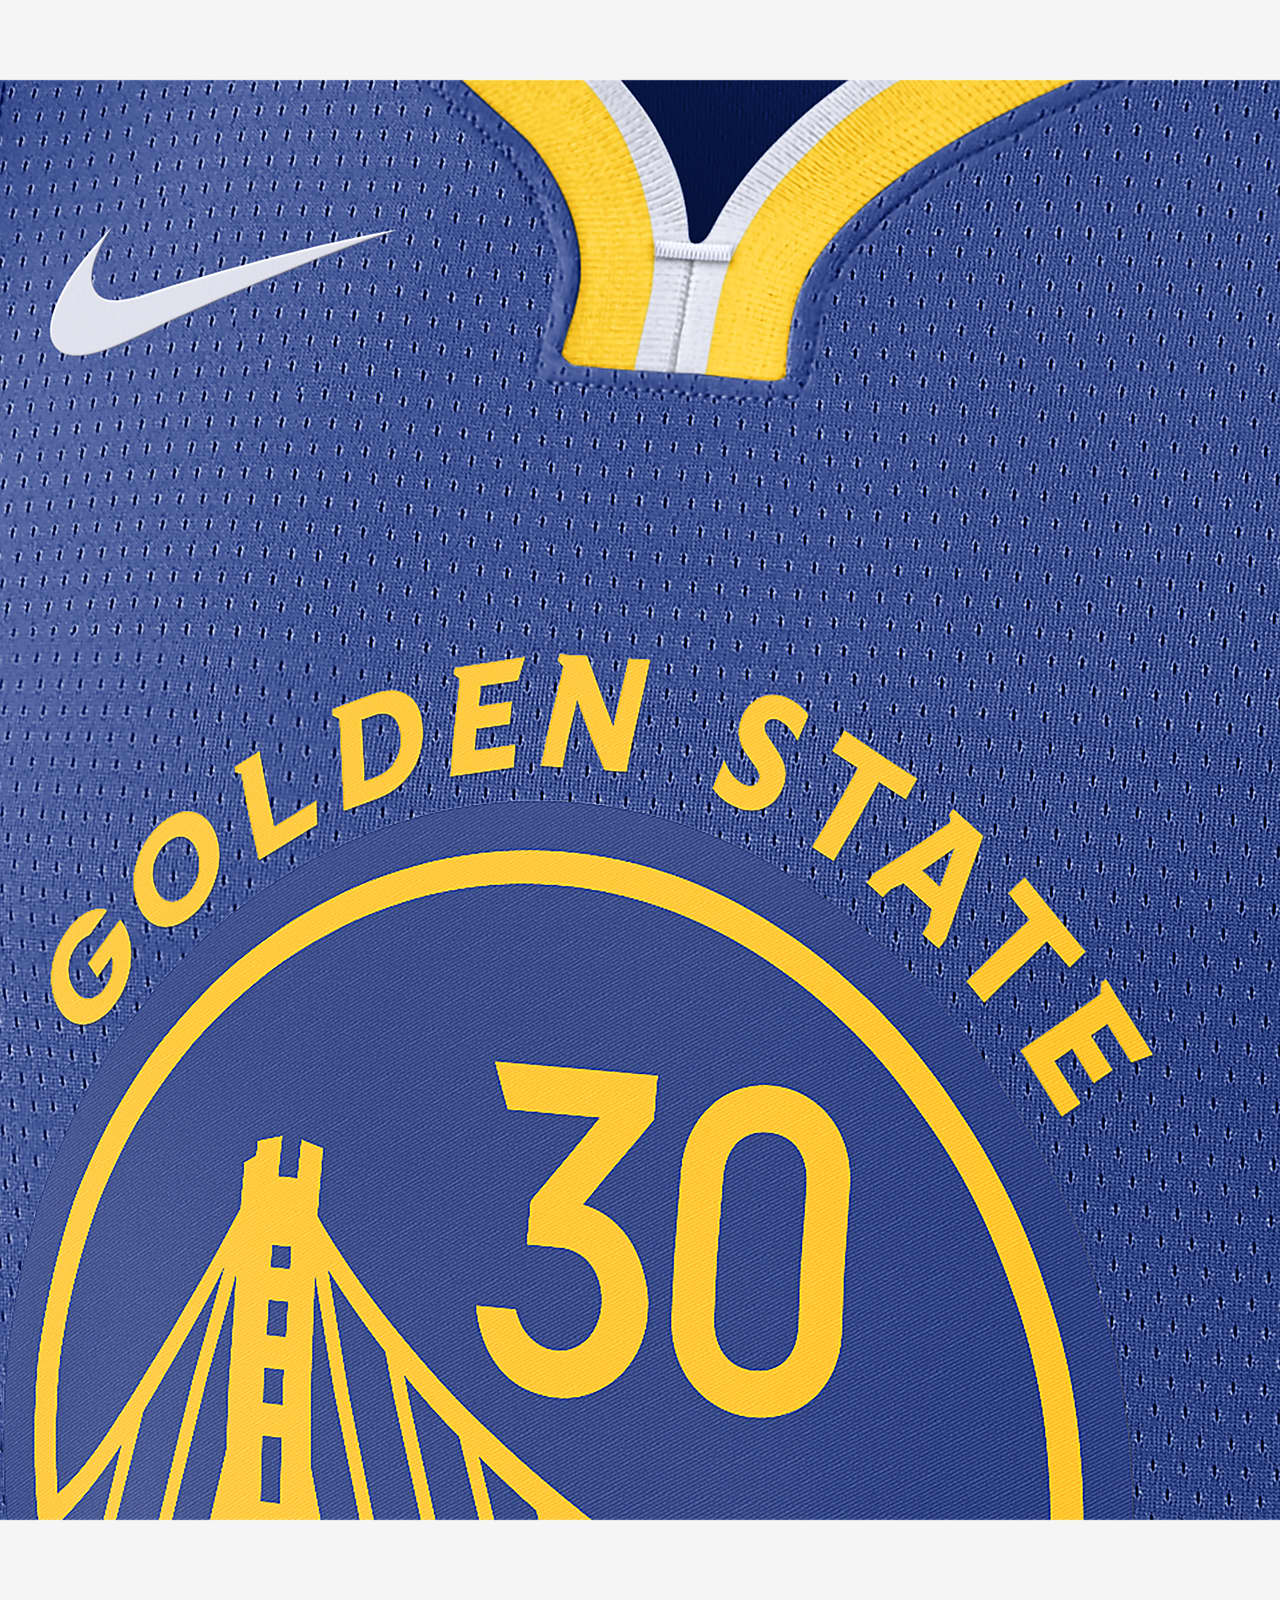 NBA GOLDEN STATE WARRIORS COLOR PATCH 7 1/2 X 7 INCHES